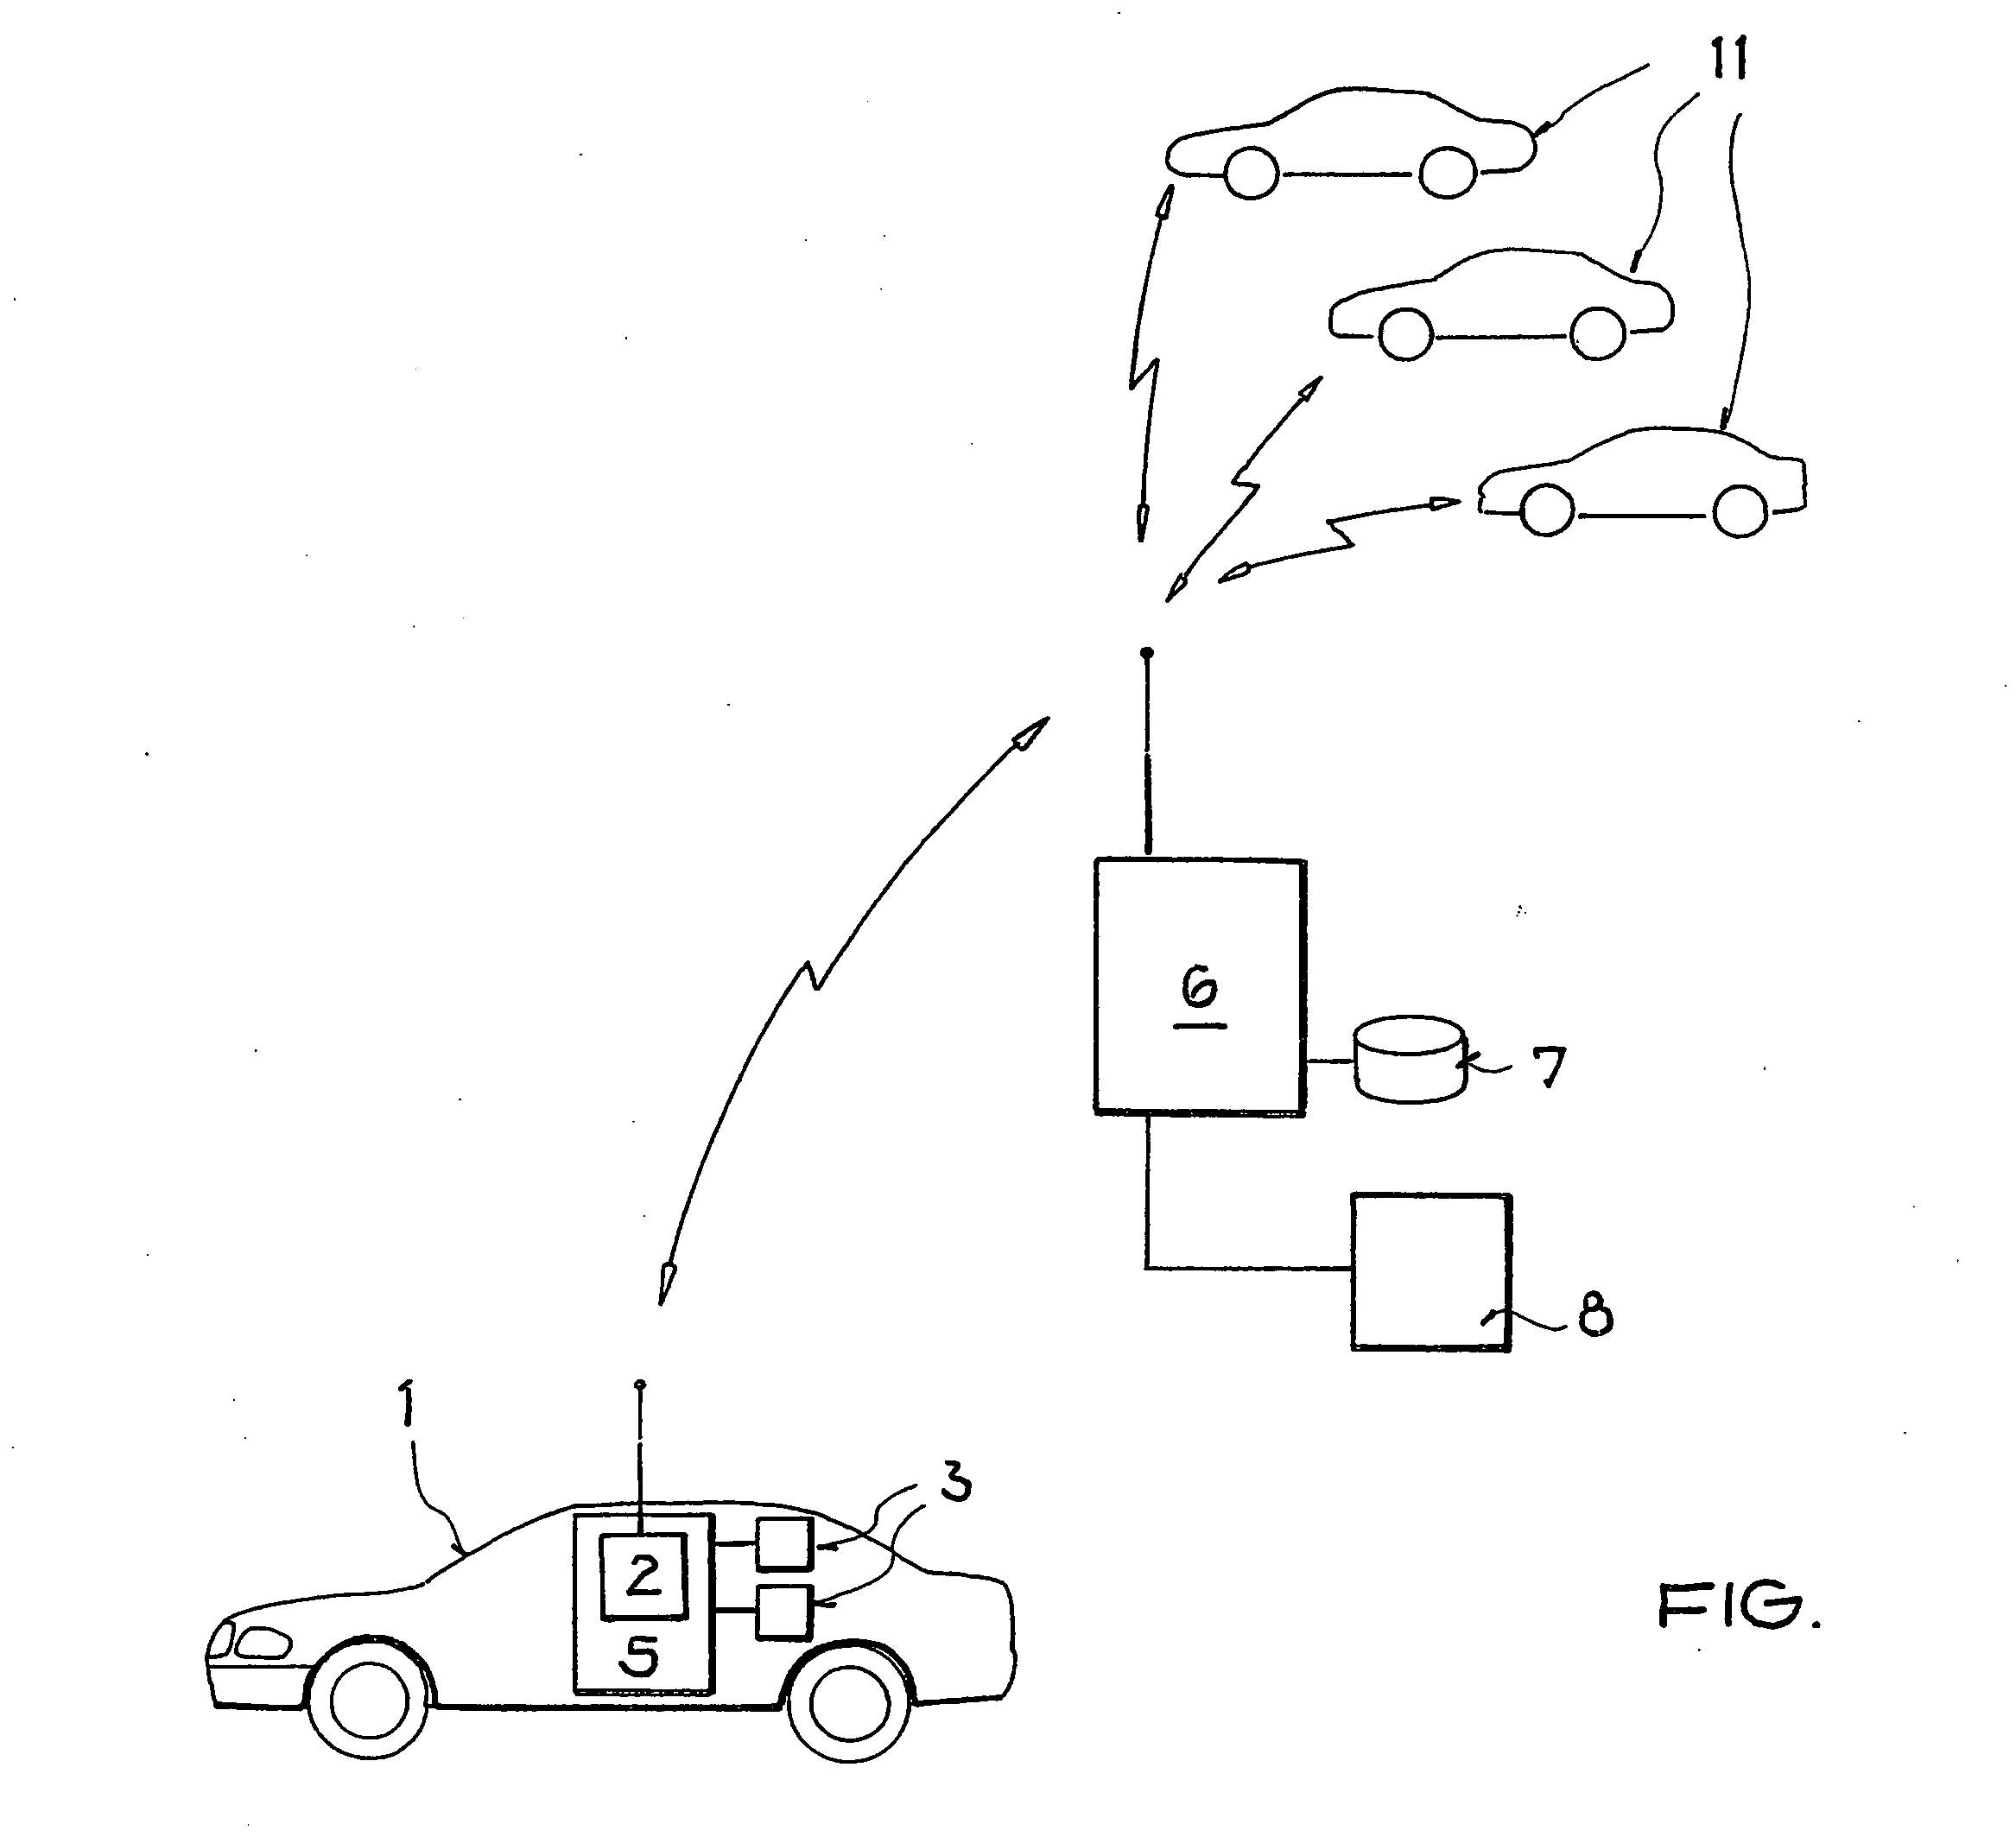 Method and apparatus in a vehicle for producing and wirelessly transmitting messages to other vehicles